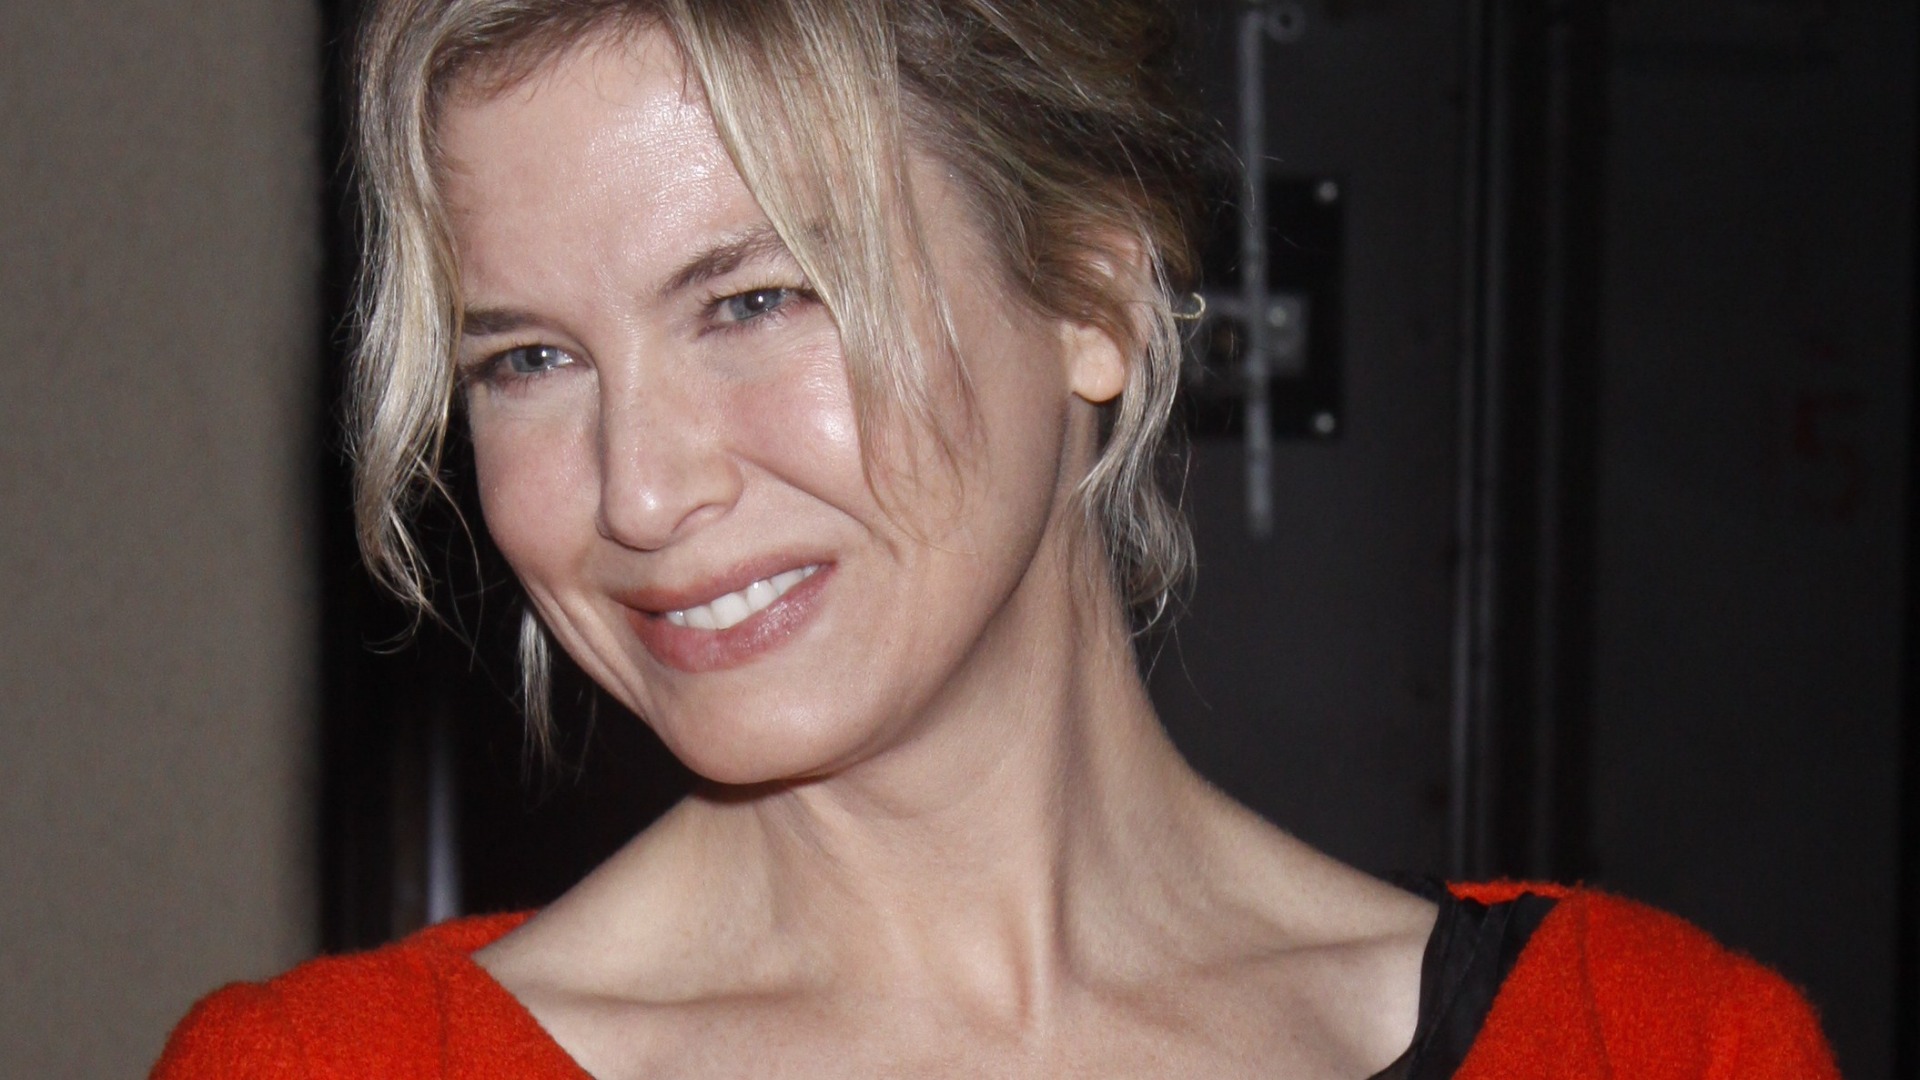 Renee Zellweger face before she dramatically altered it